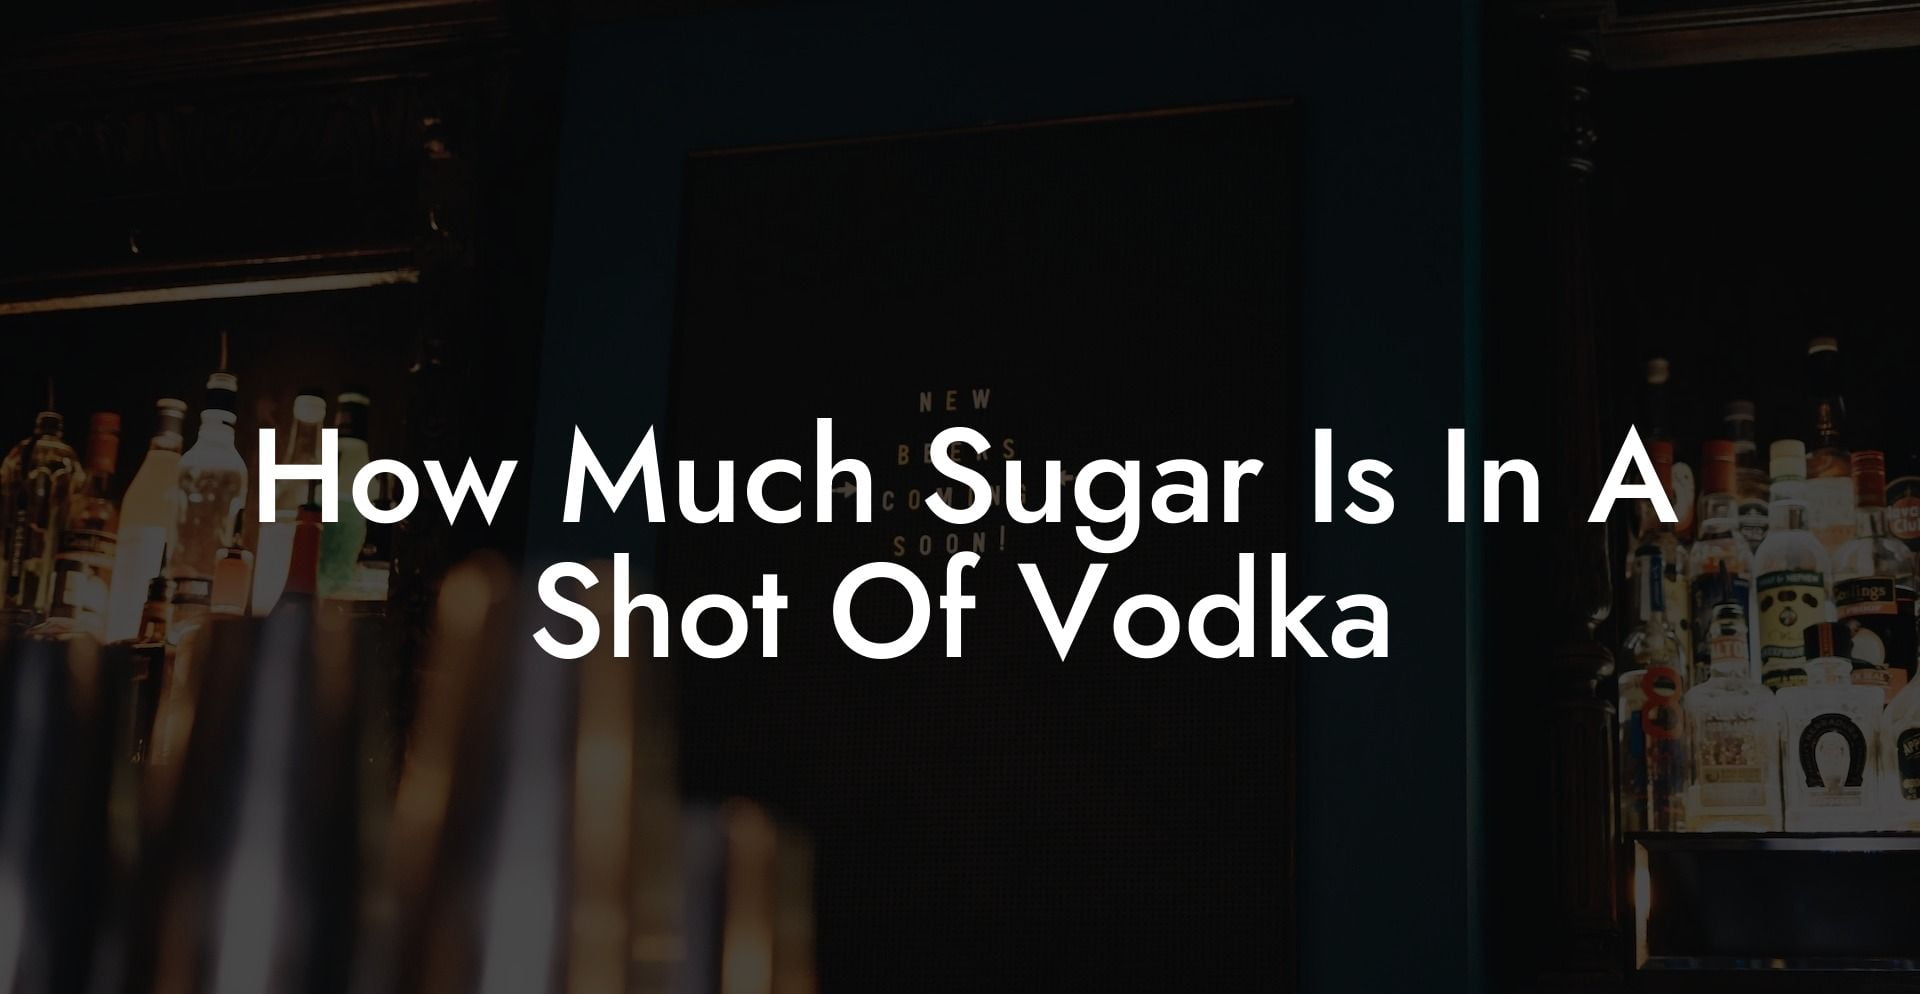 How Much Sugar Is In A Shot Of Vodka